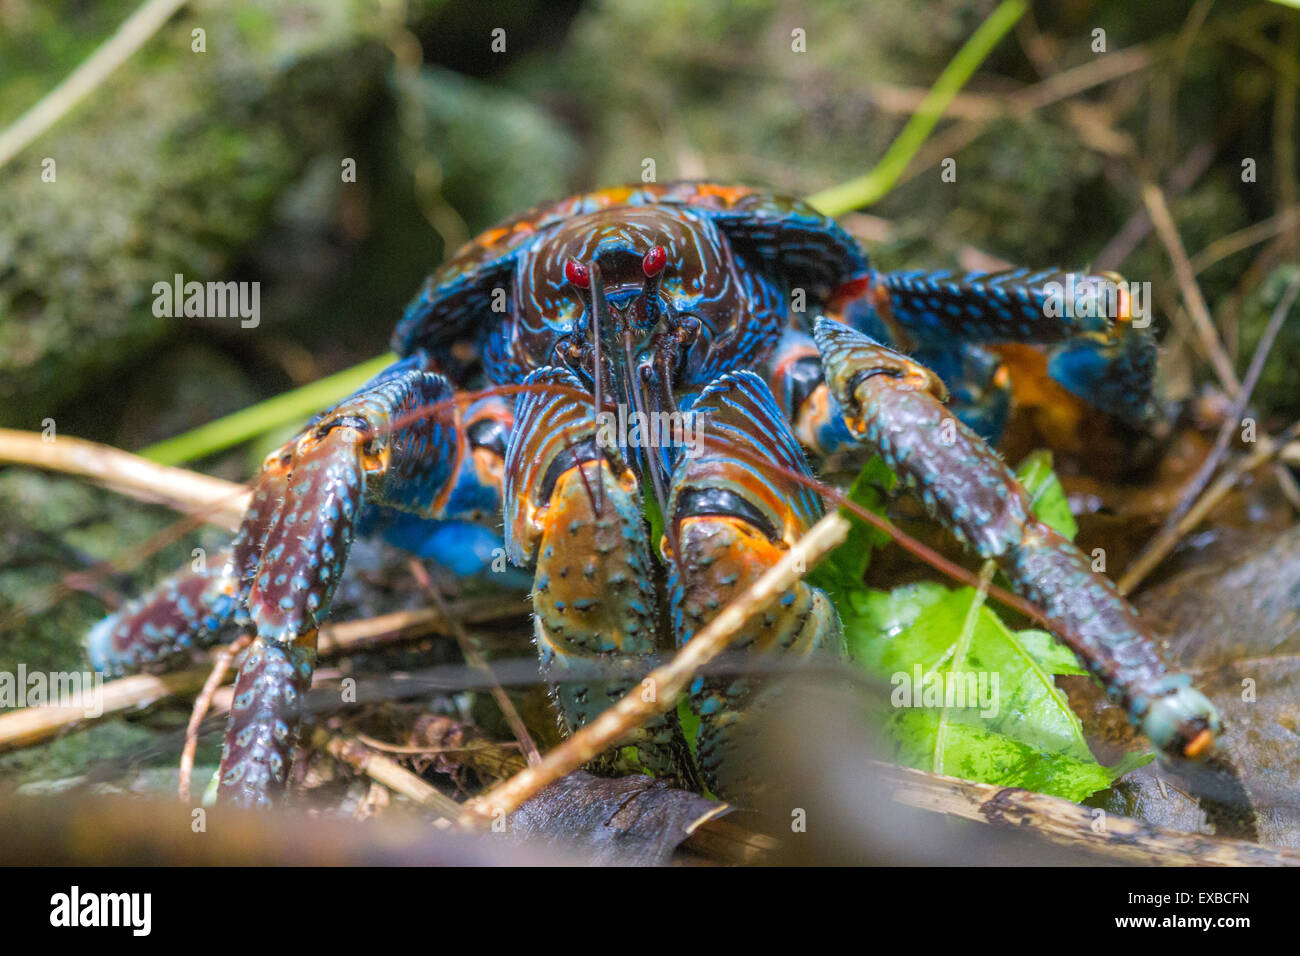 a brightly colored Coconut crab (Birgus latro) on a tropical island in the South Pacific Stock Photo